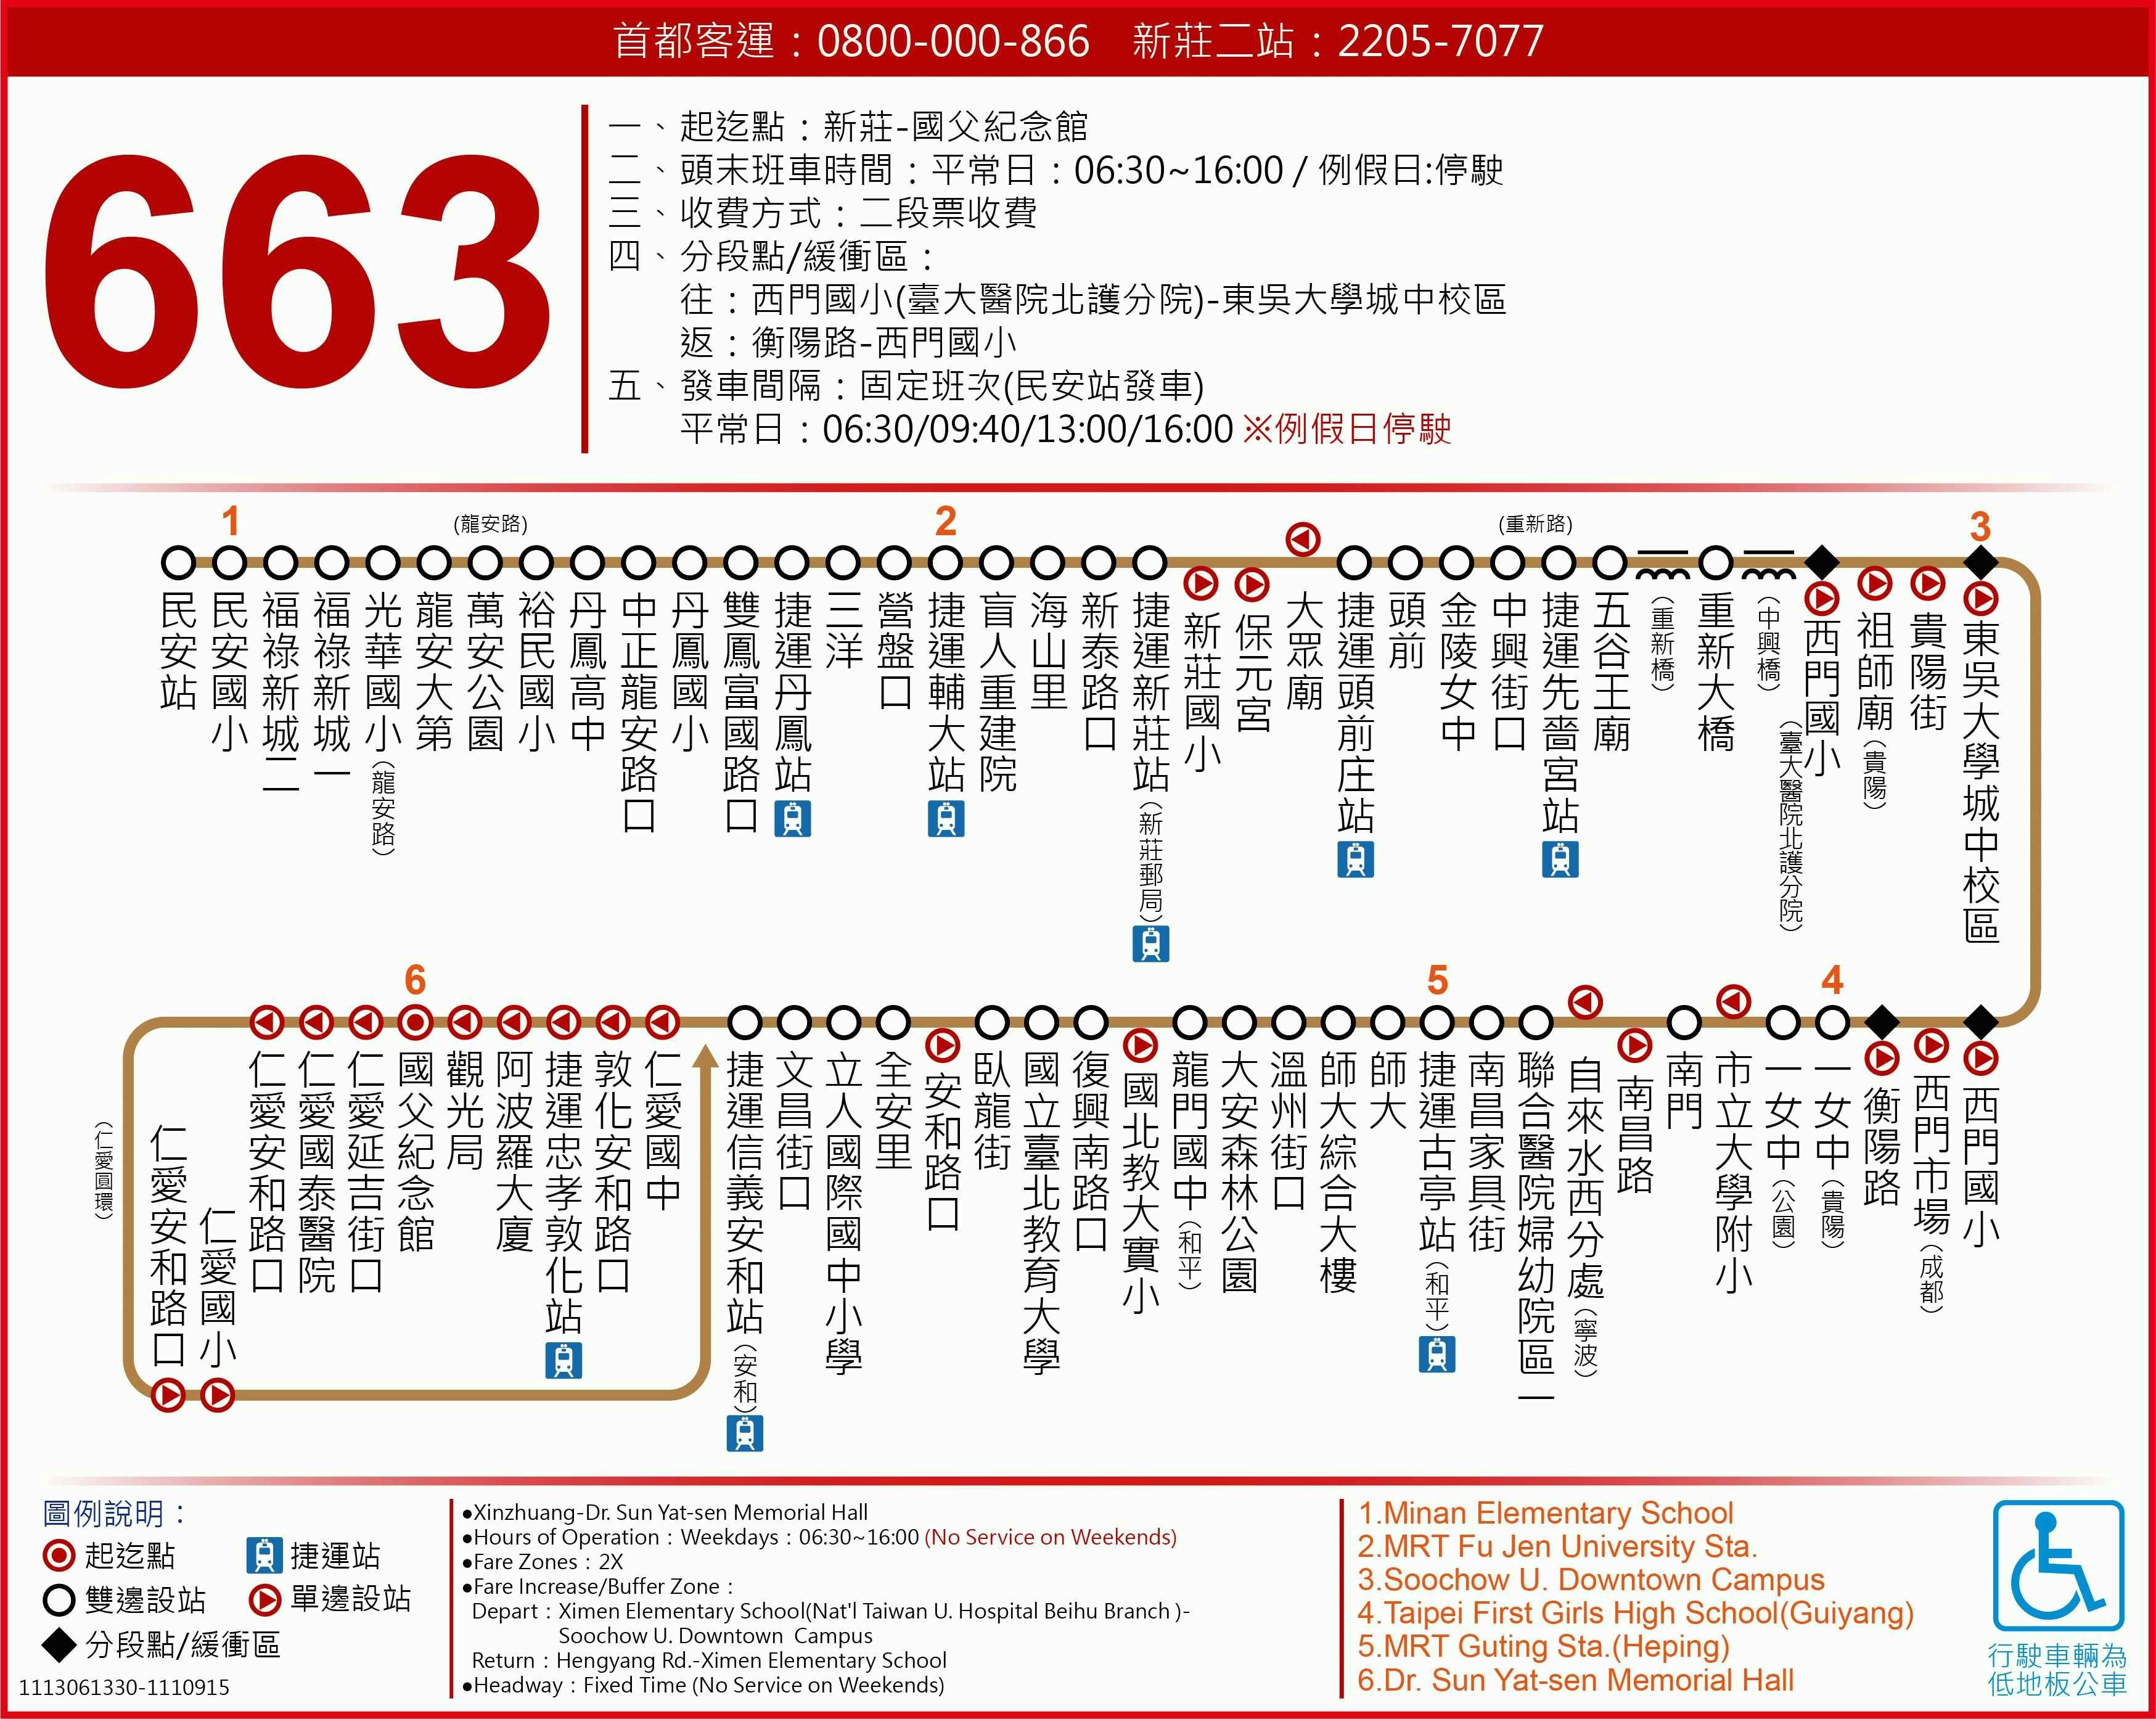 663Route Map-台北市 Bus